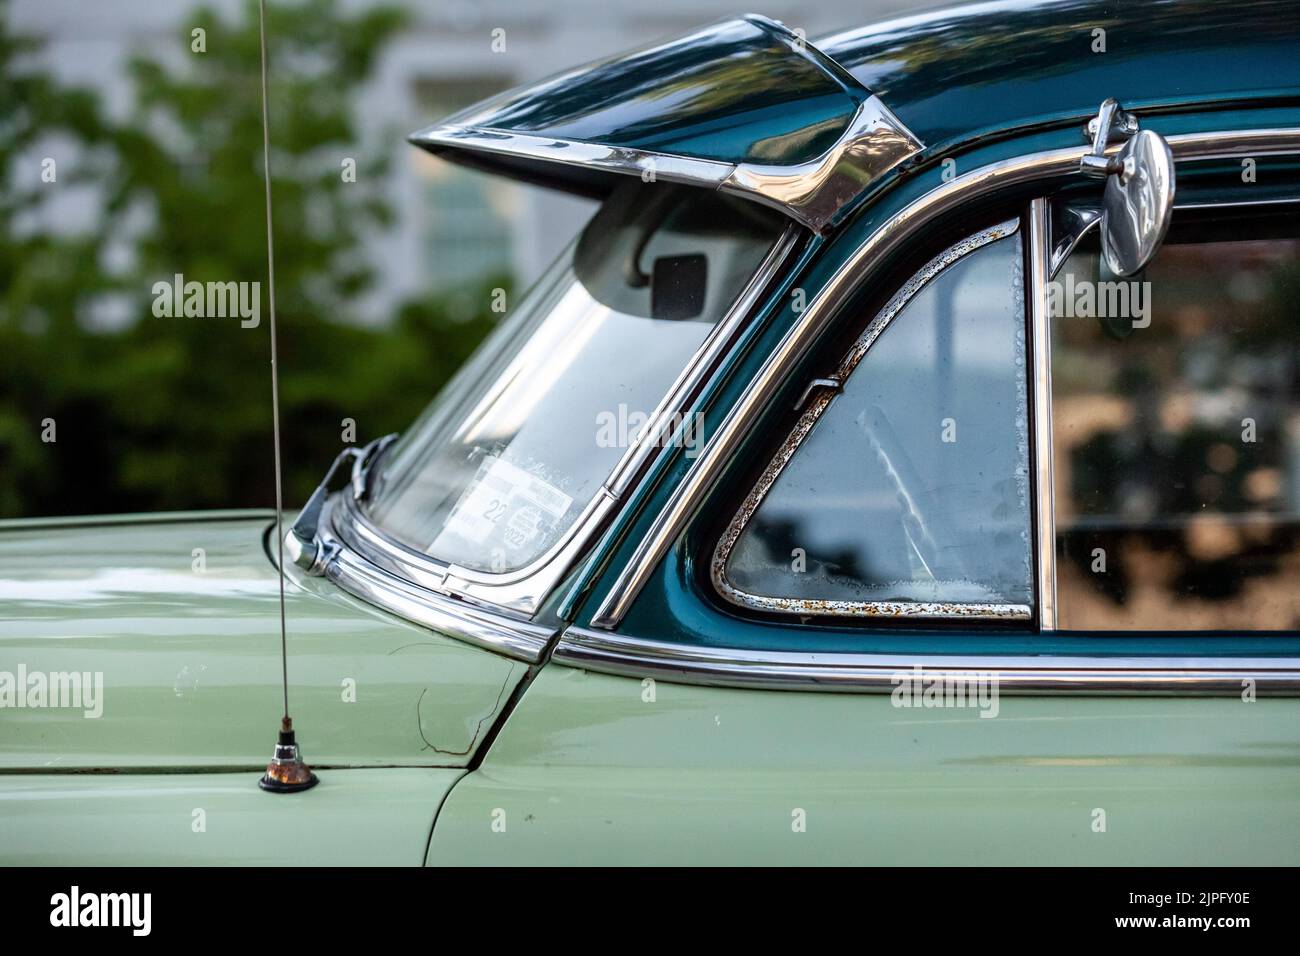 https://c8.alamy.com/comp/2JPFY0E/washington-united-states-07th-aug-2022-1953-chevrolet-210-with-a-sun-visor-the-car-is-one-of-more-than-20-antique-vehicles-used-in-the-movie-rustin-about-civil-rights-activist-bayard-rustin-the-movie-is-produced-by-barack-and-michelle-obamas-production-company-higher-ground-productions-and-will-debut-on-netflix-in-2023-photo-by-allison-baileysopa-imagessipa-usa-credit-sipa-usaalamy-live-news-2JPFY0E.jpg